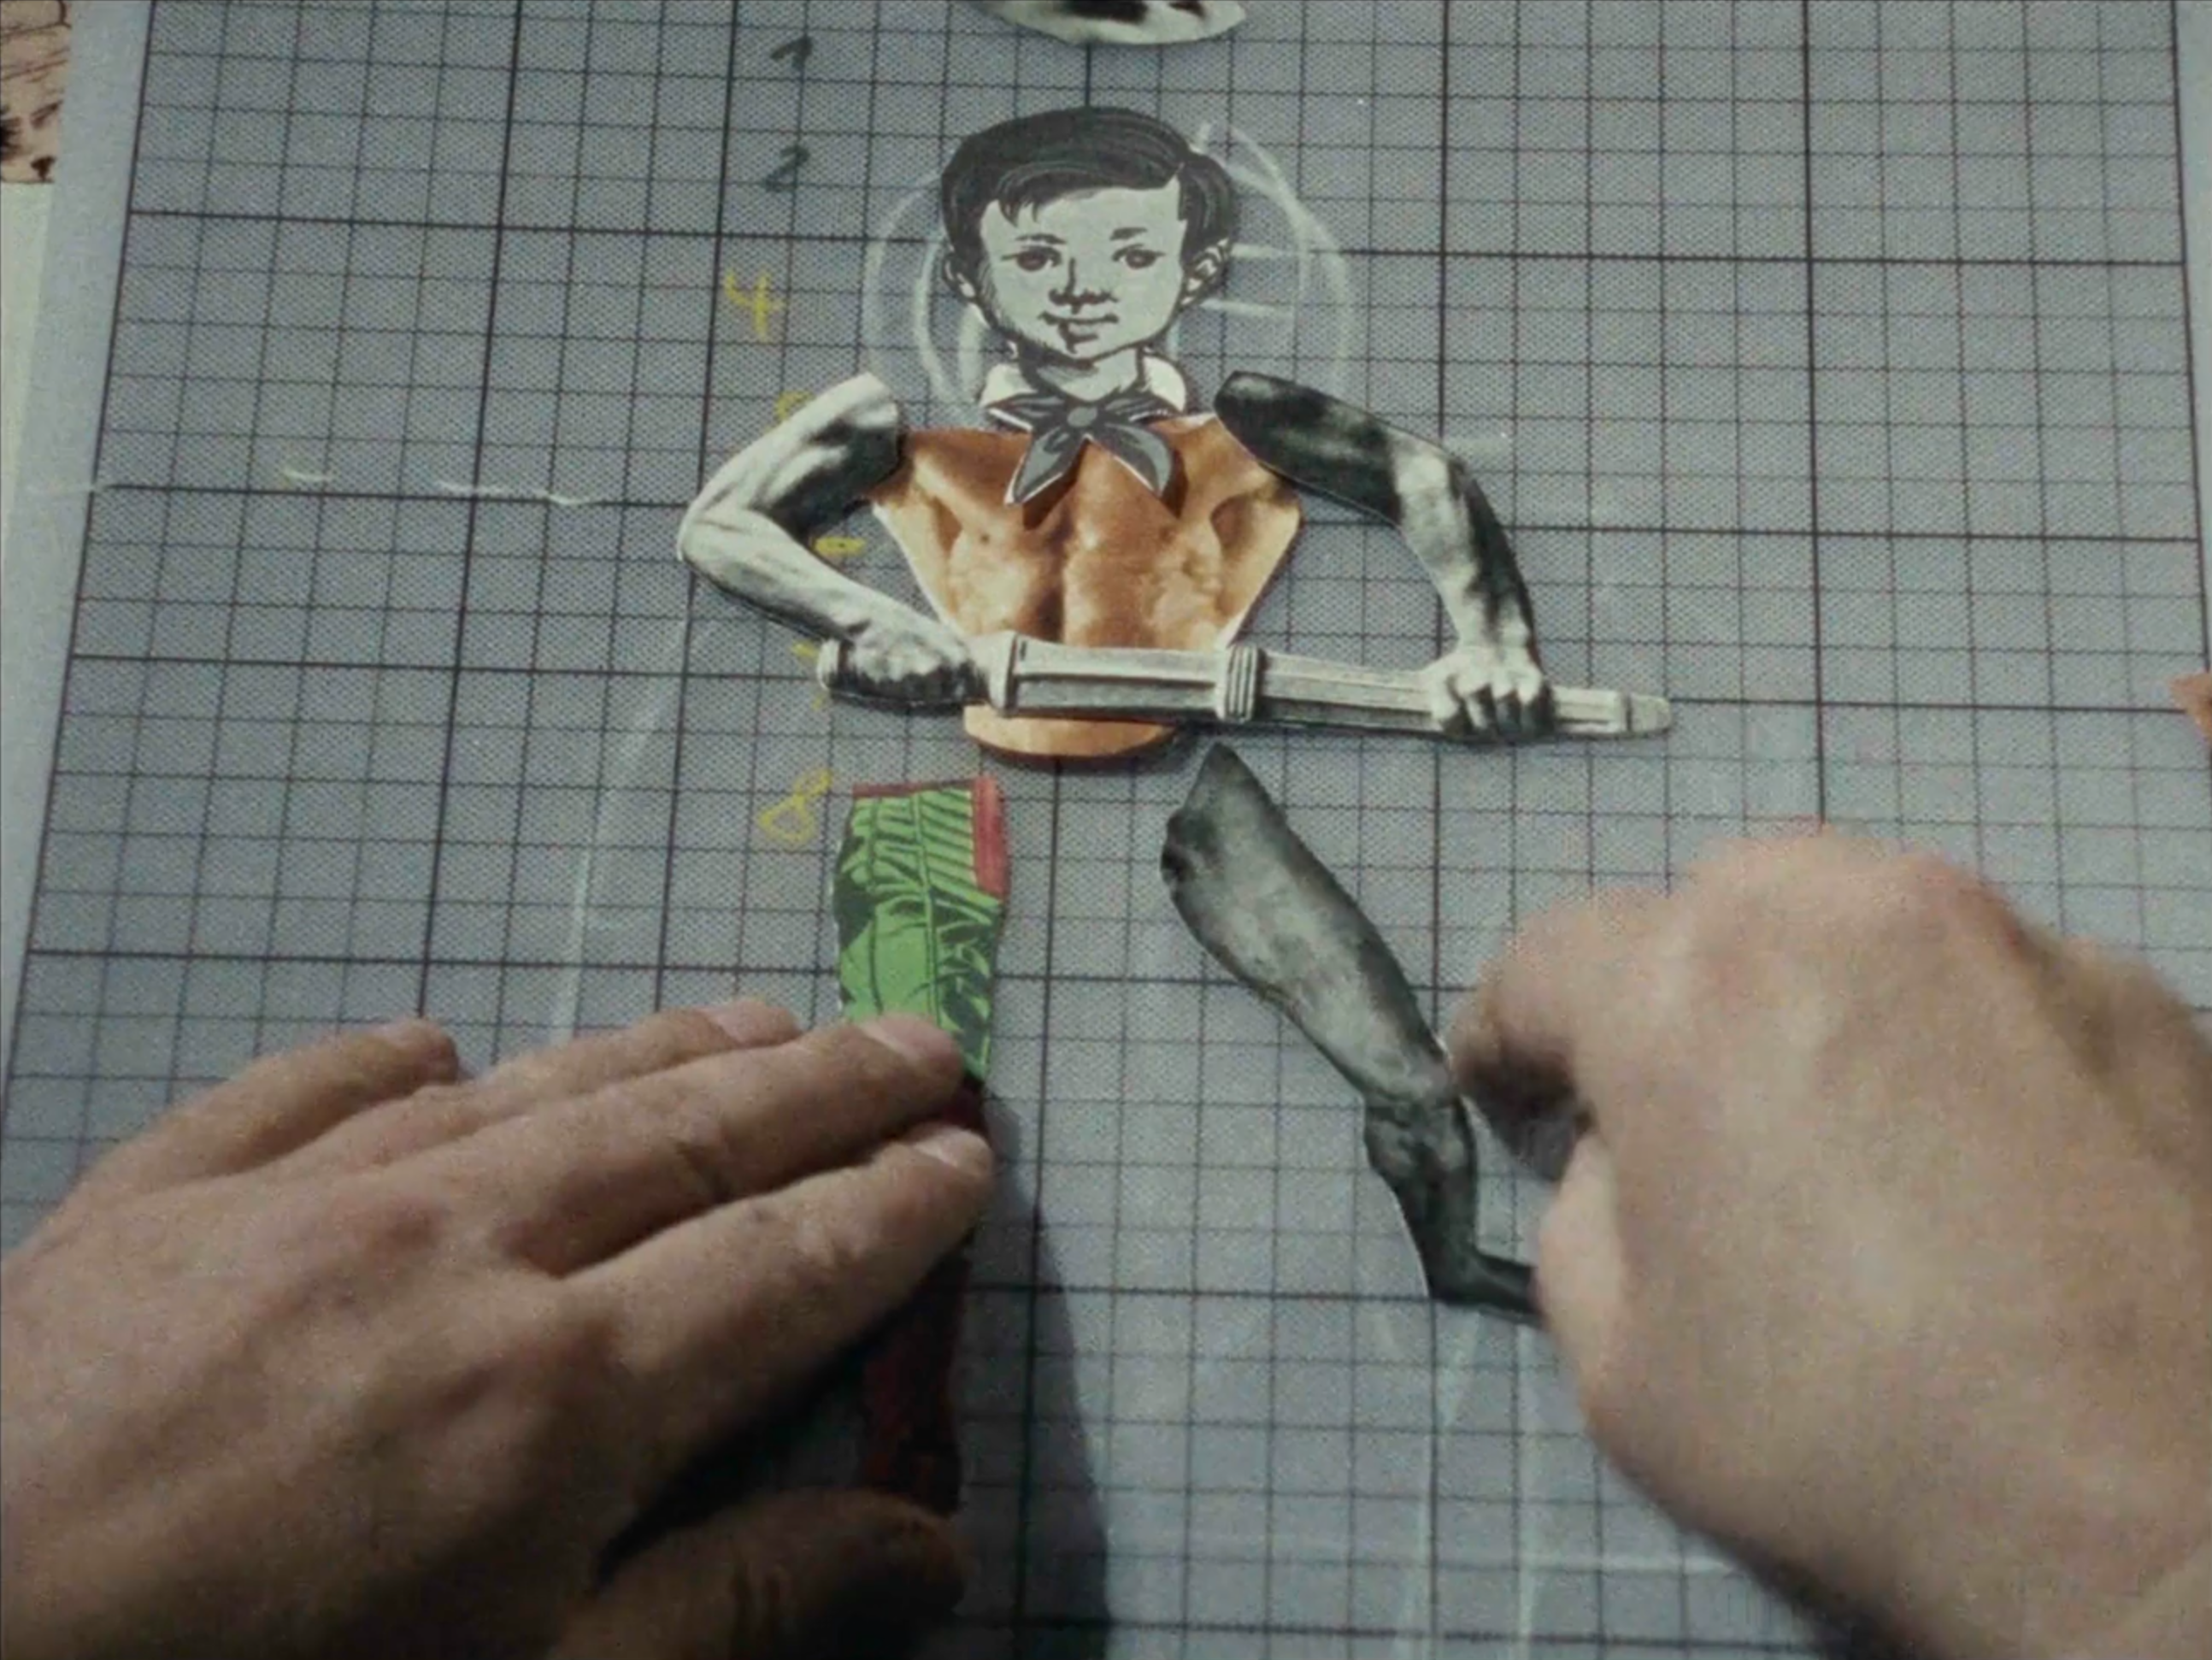 film still depicting a man's hands holding paper cut-out legs as he pieces together a humanoid figure on top of a gray grid cutting mat